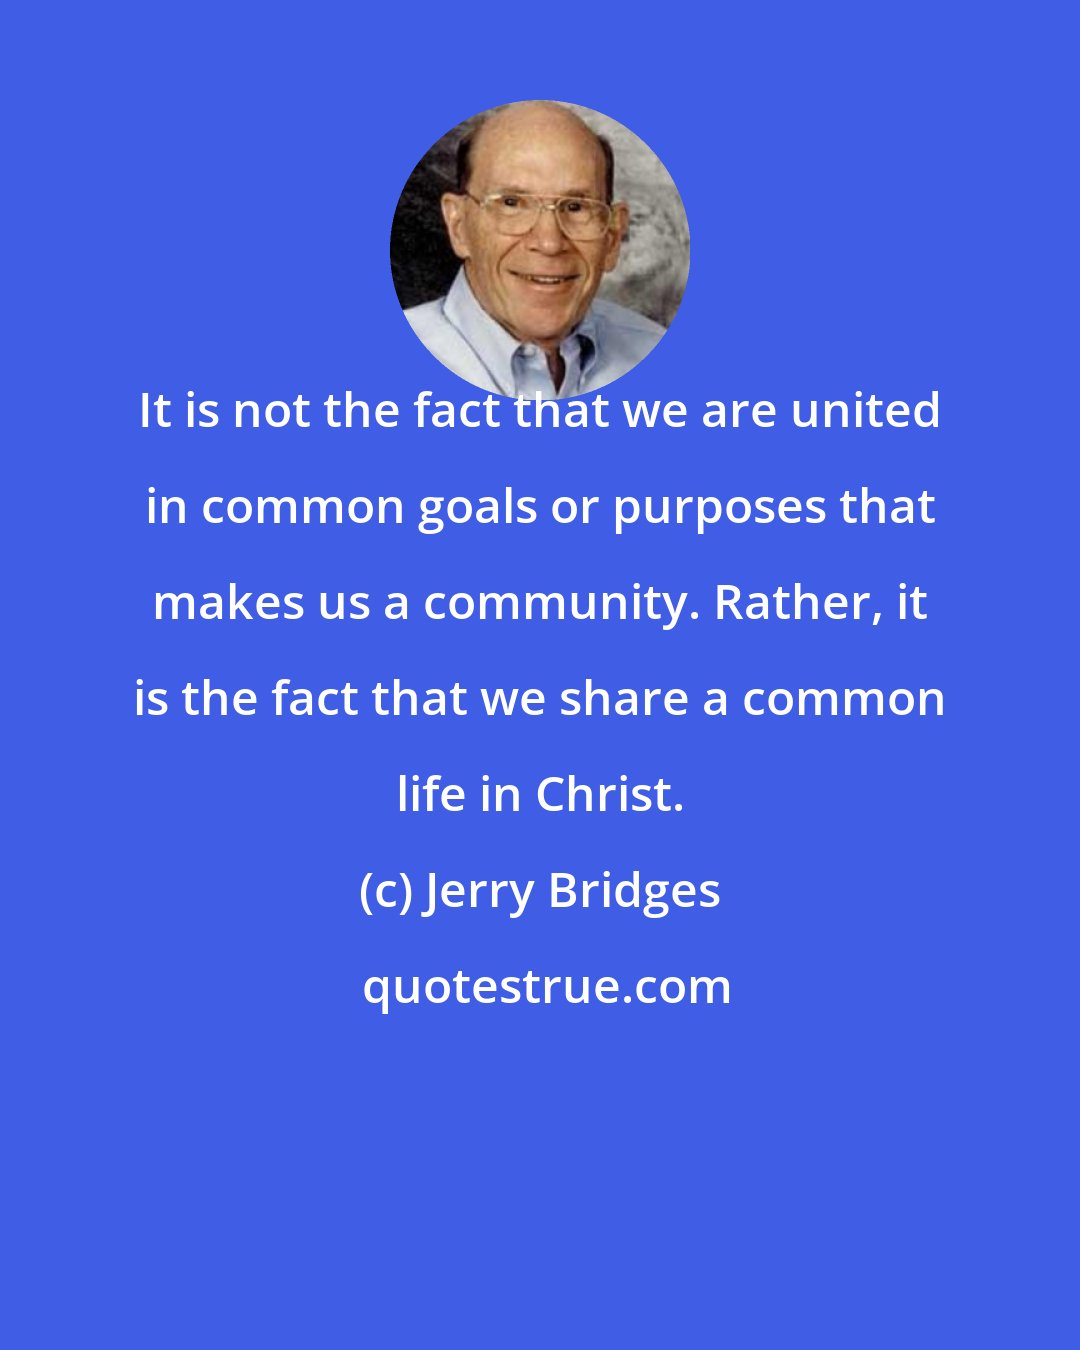 Jerry Bridges: It is not the fact that we are united in common goals or purposes that makes us a community. Rather, it is the fact that we share a common life in Christ.